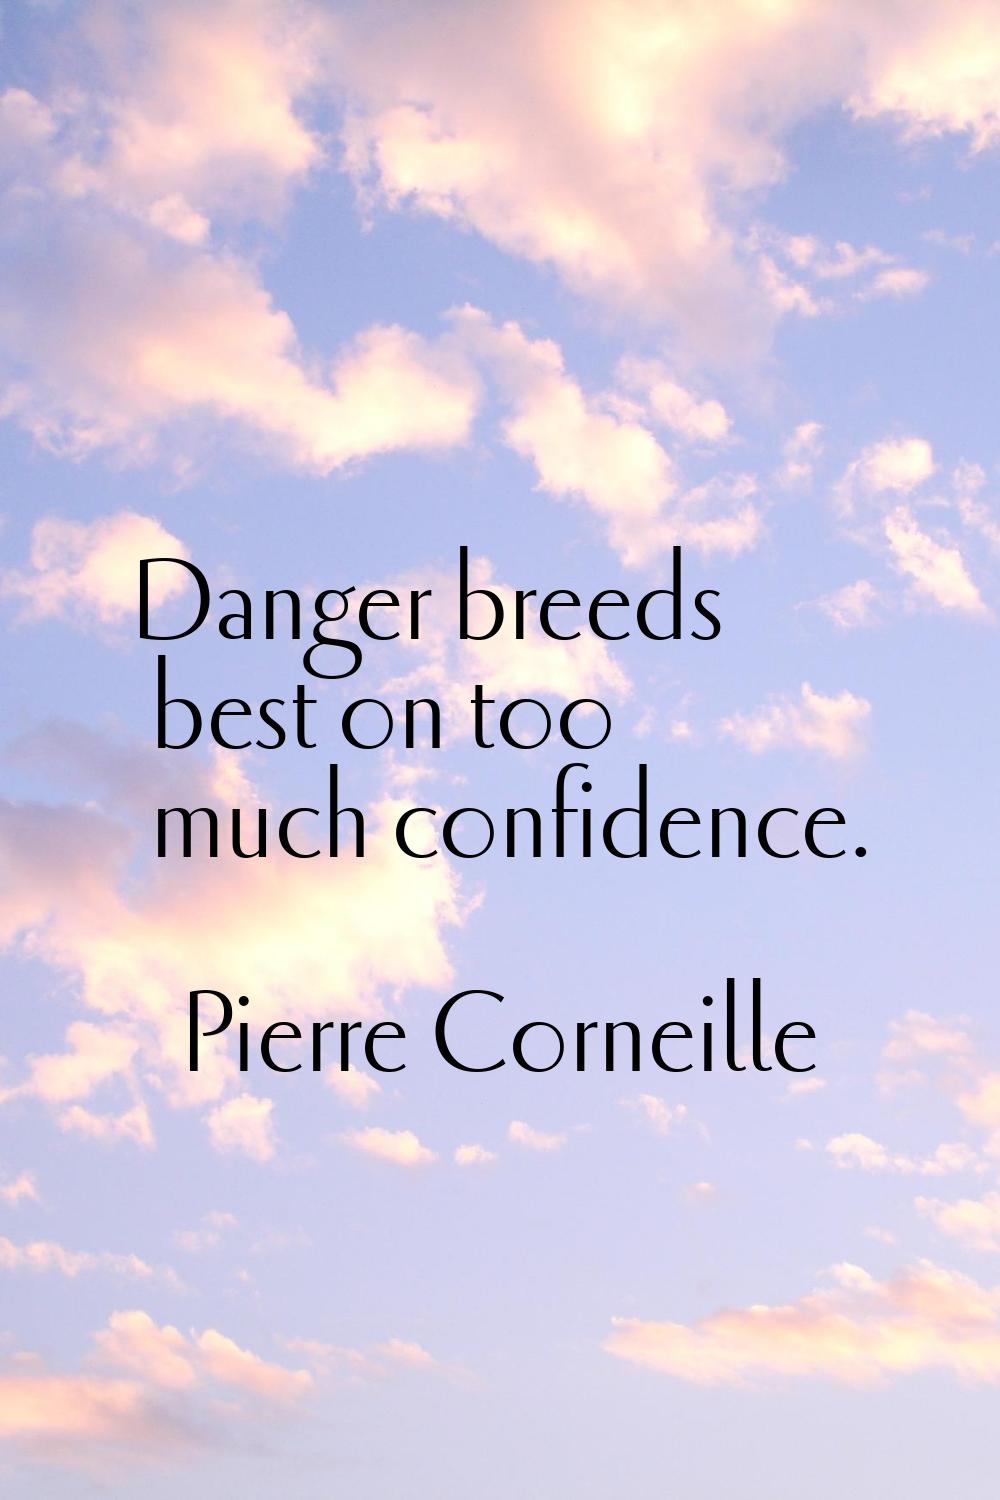 Danger breeds best on too much confidence.